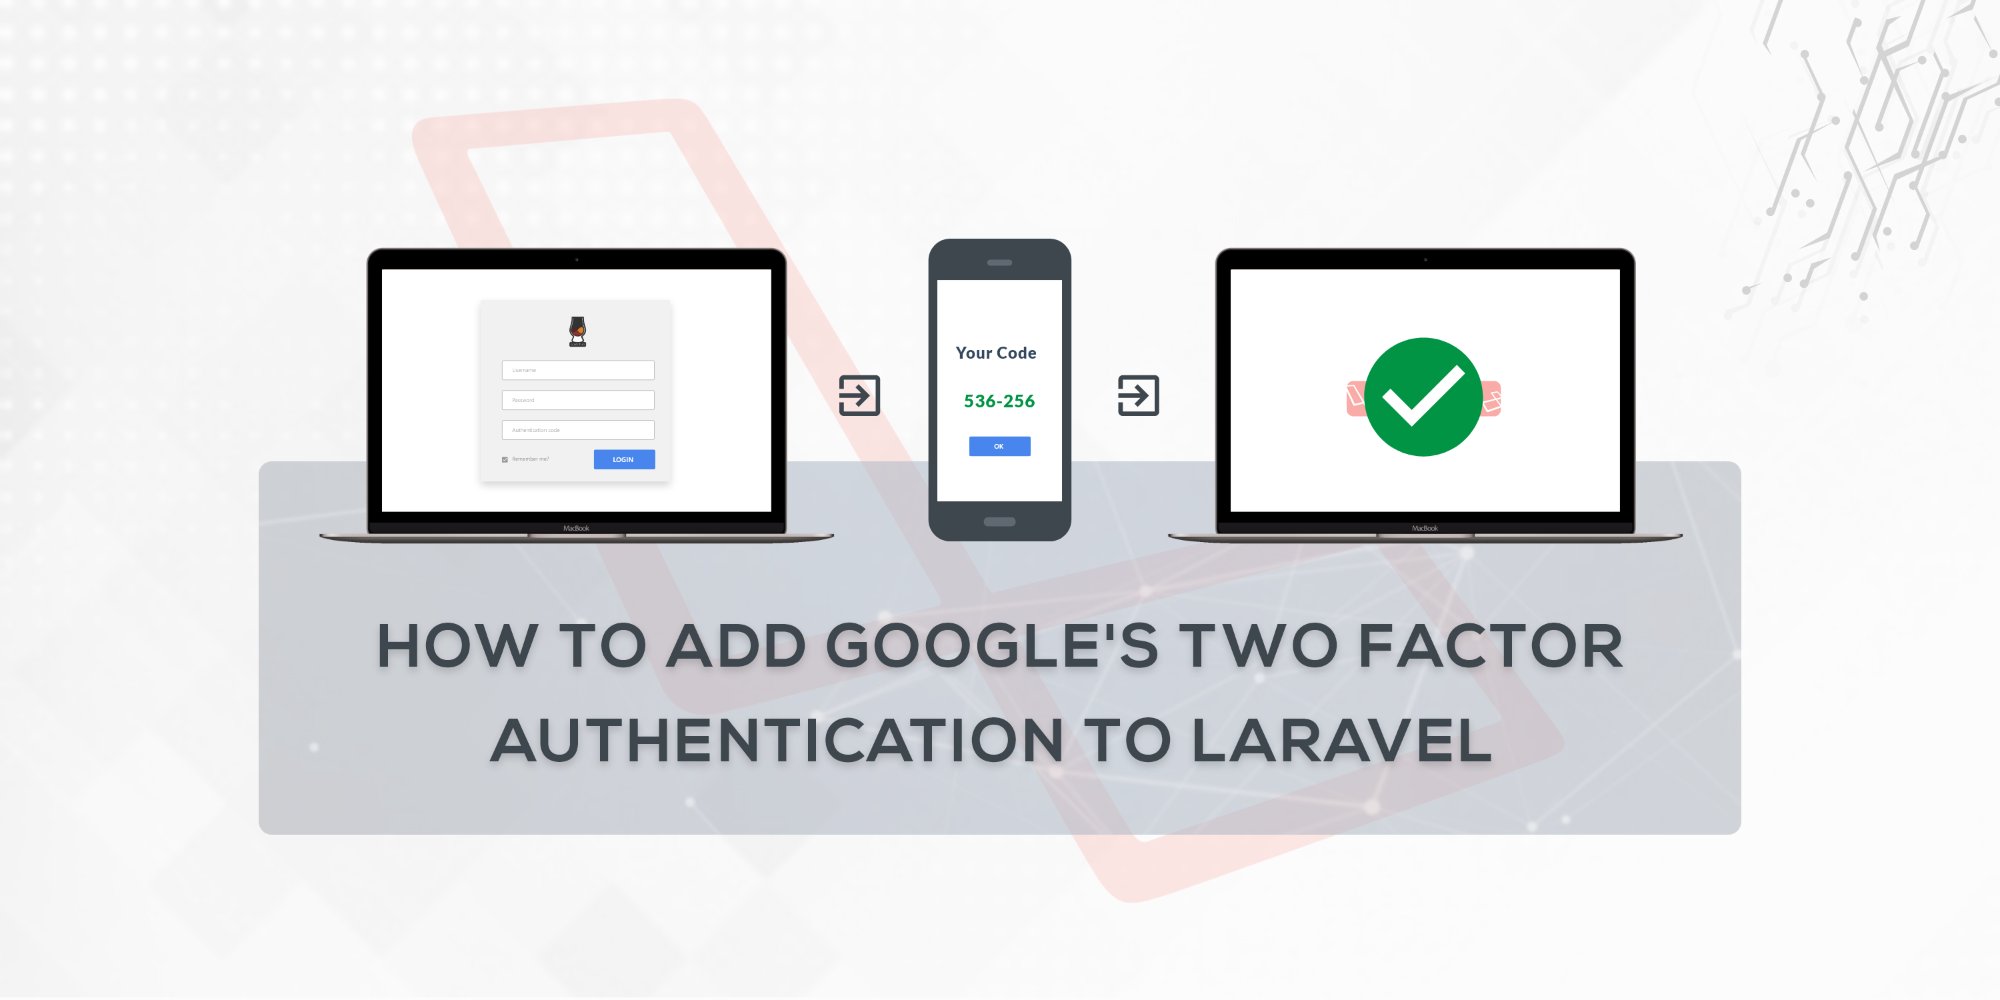 How to Add Google's Two Factor Authentication to Laravel